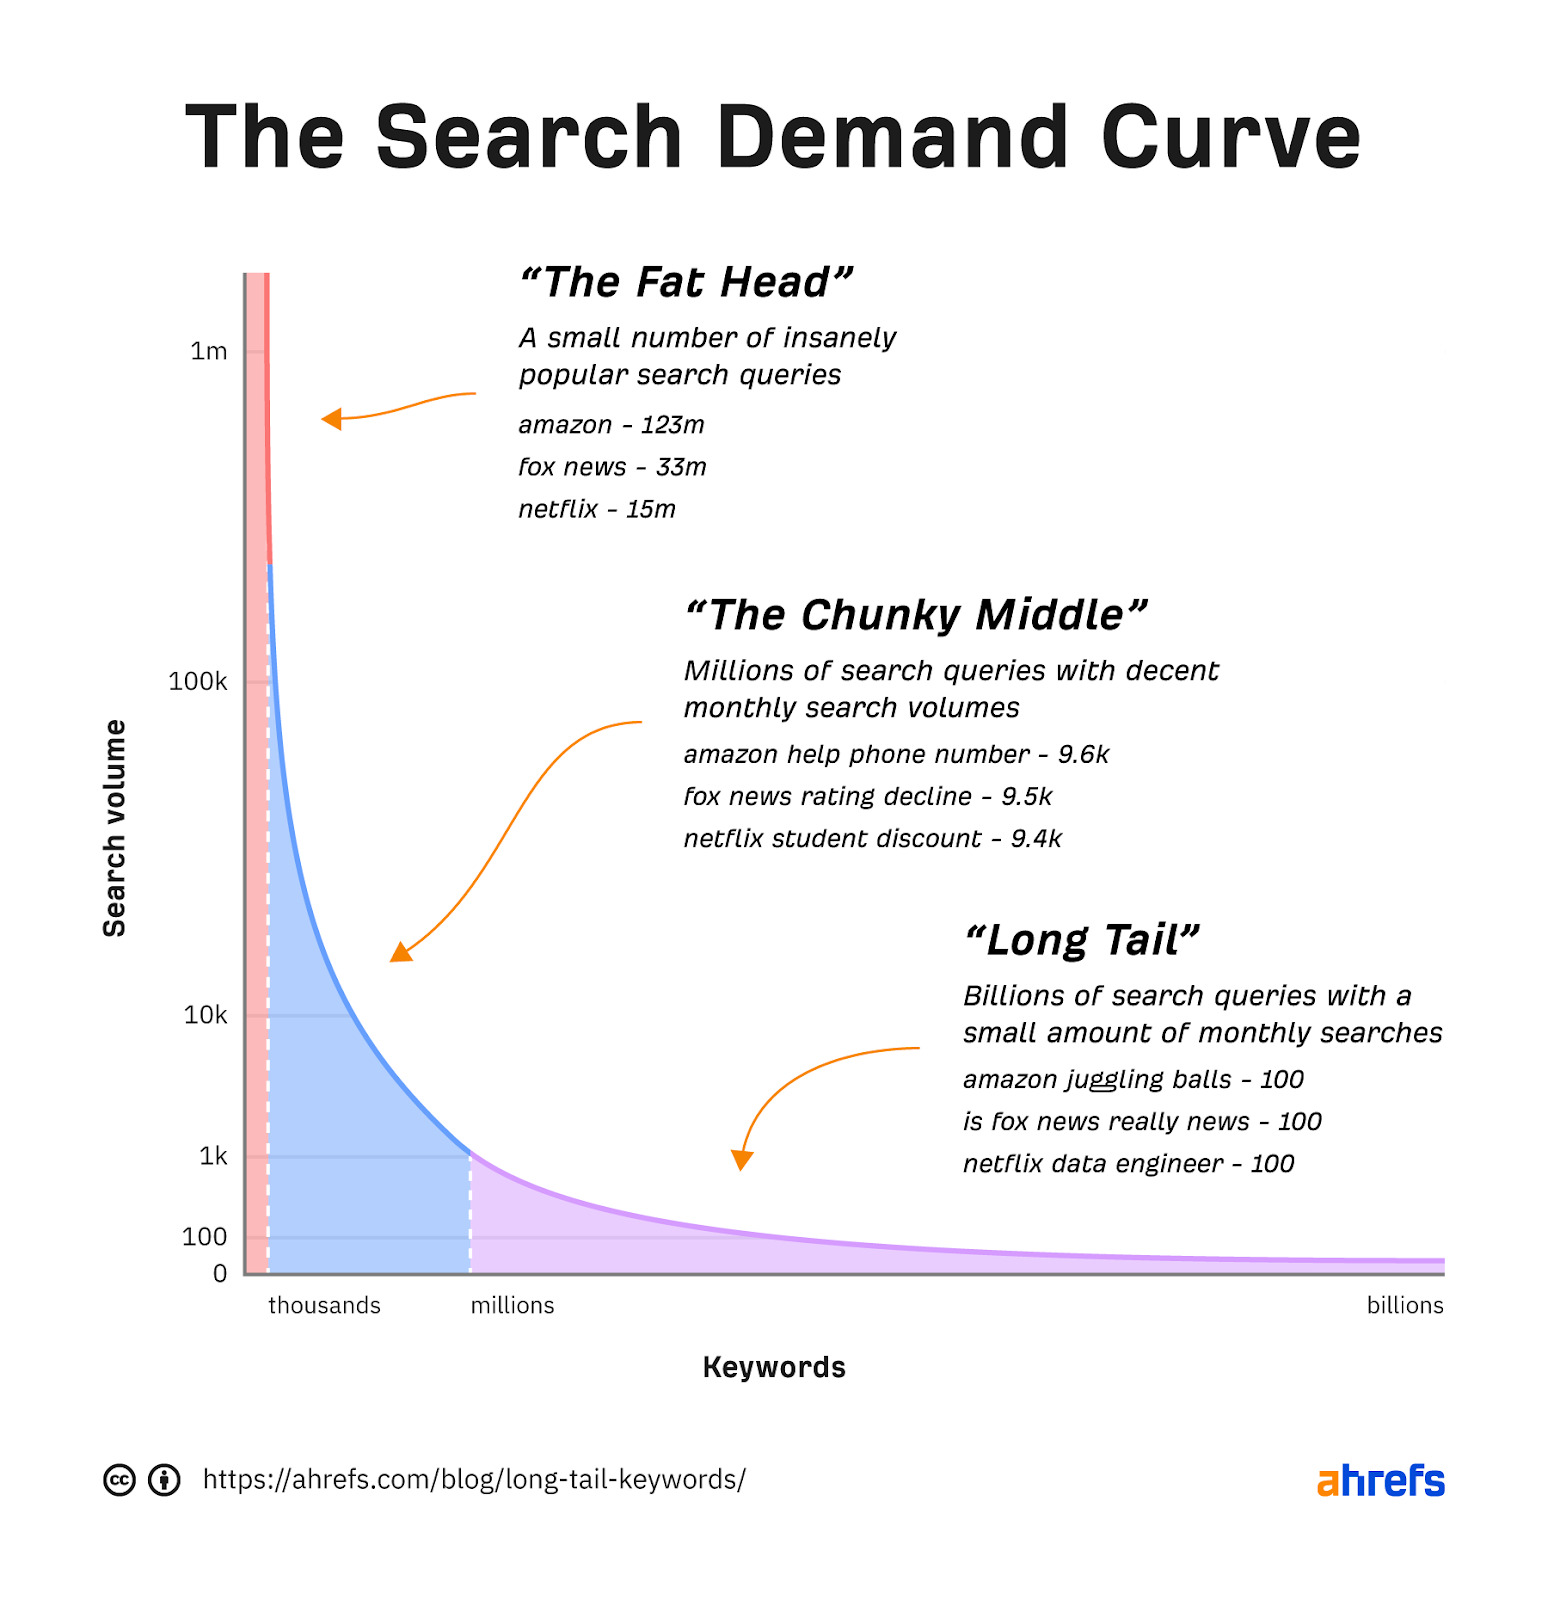 Understanding the Search Demand Curve is a key component of successful B2B SaaS SEO